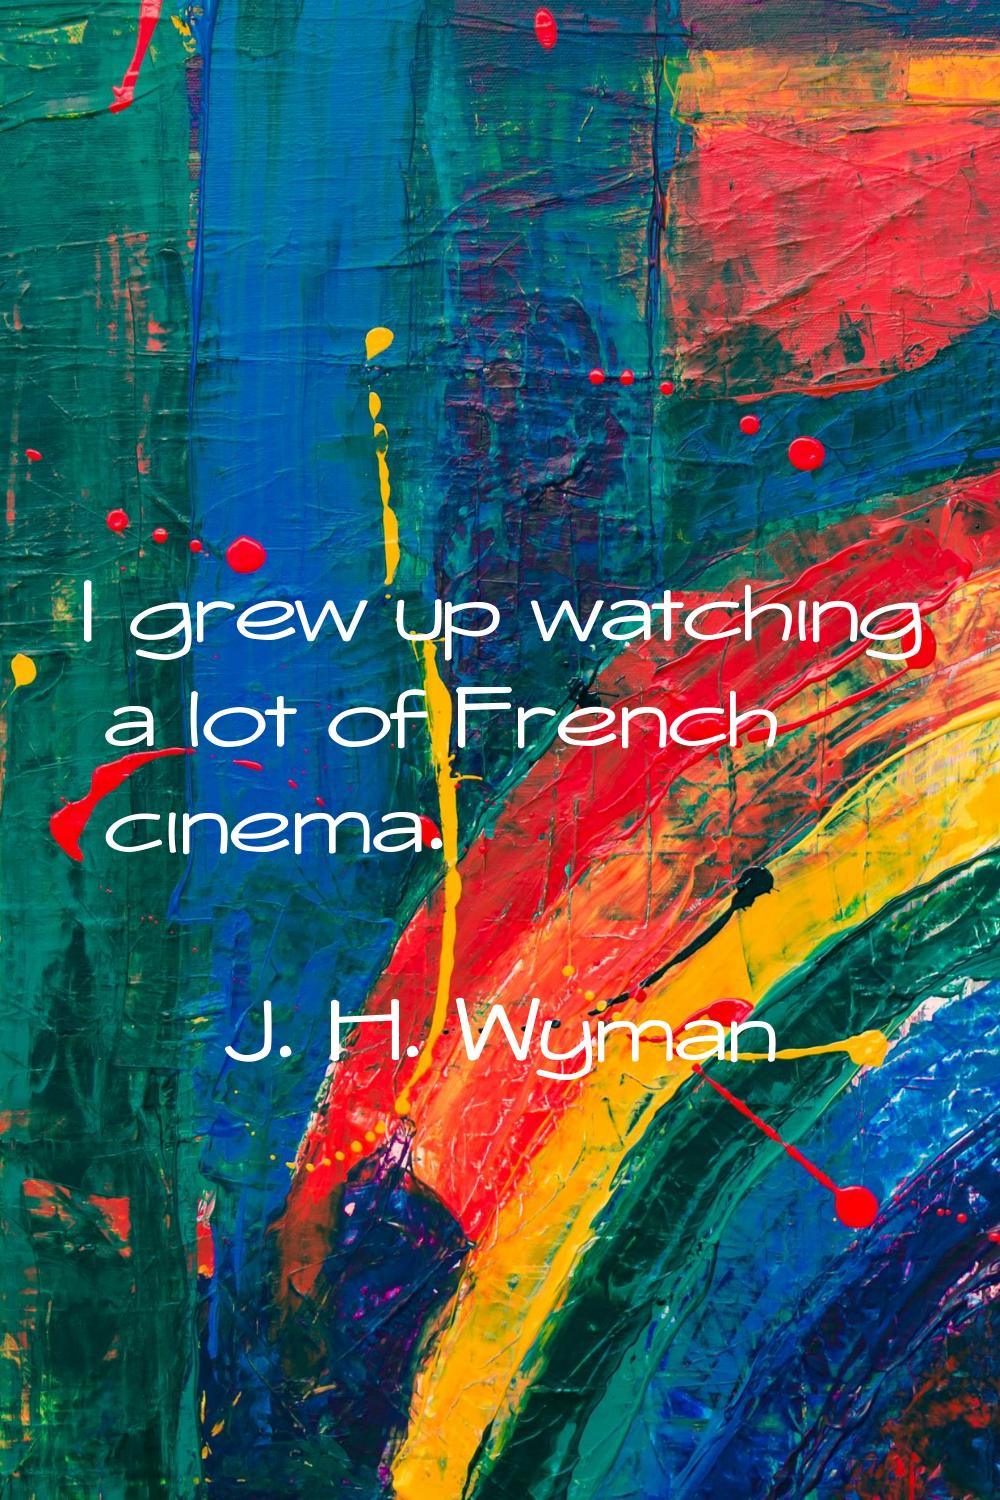 I grew up watching a lot of French cinema.